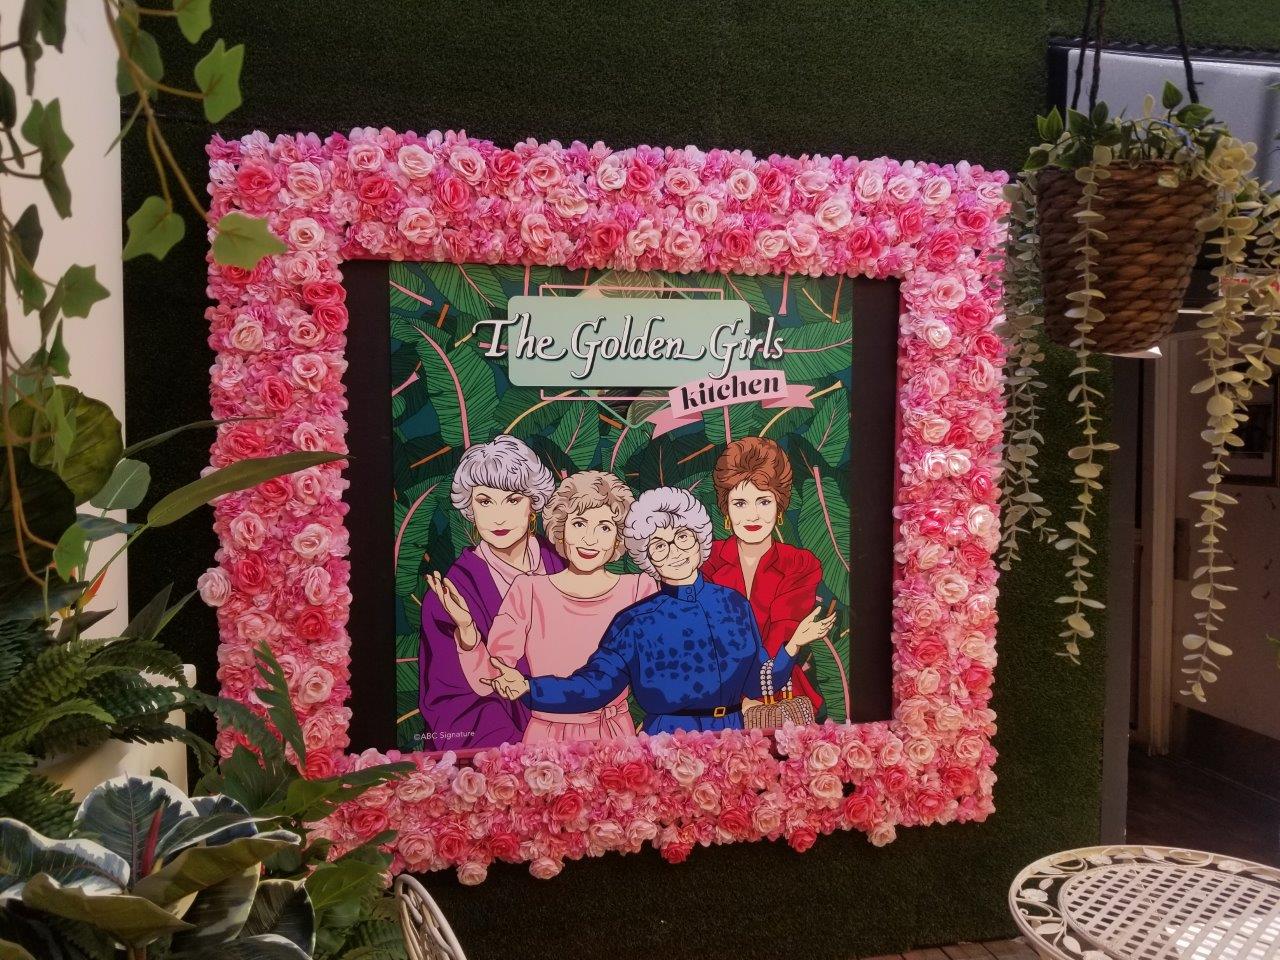 Golden Girls Kitchen San Francisco done by Martin Sign Company.